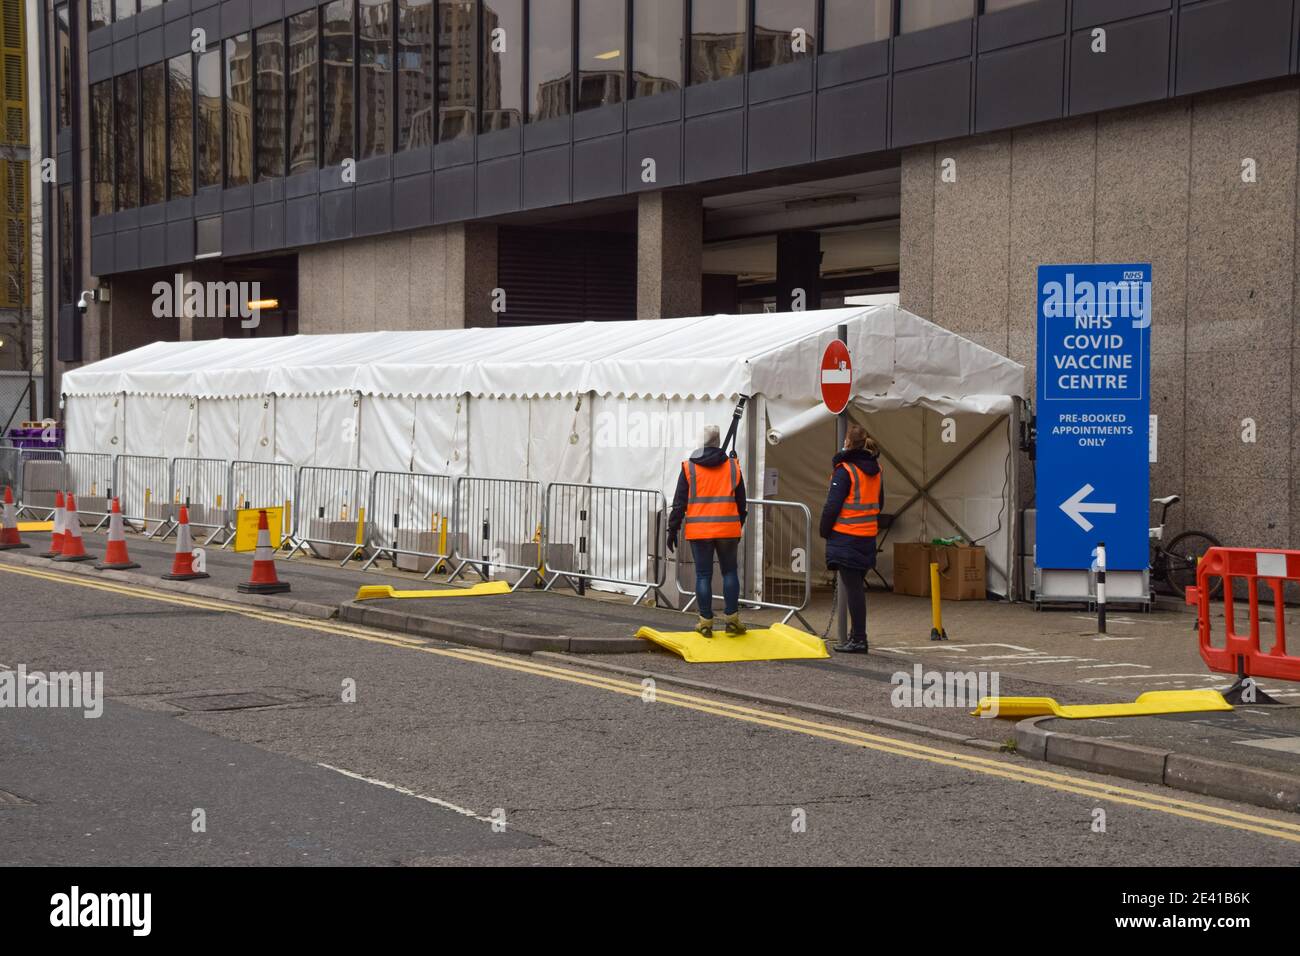 London, UK. 21st Jan, 2021. The NHS covid-19 Vaccine Centre in Wembley.Several mass vaccination sites have been opened around England, as the government rolls out its coronavirus vaccination program. Credit: SOPA Images Limited/Alamy Live News Stock Photo